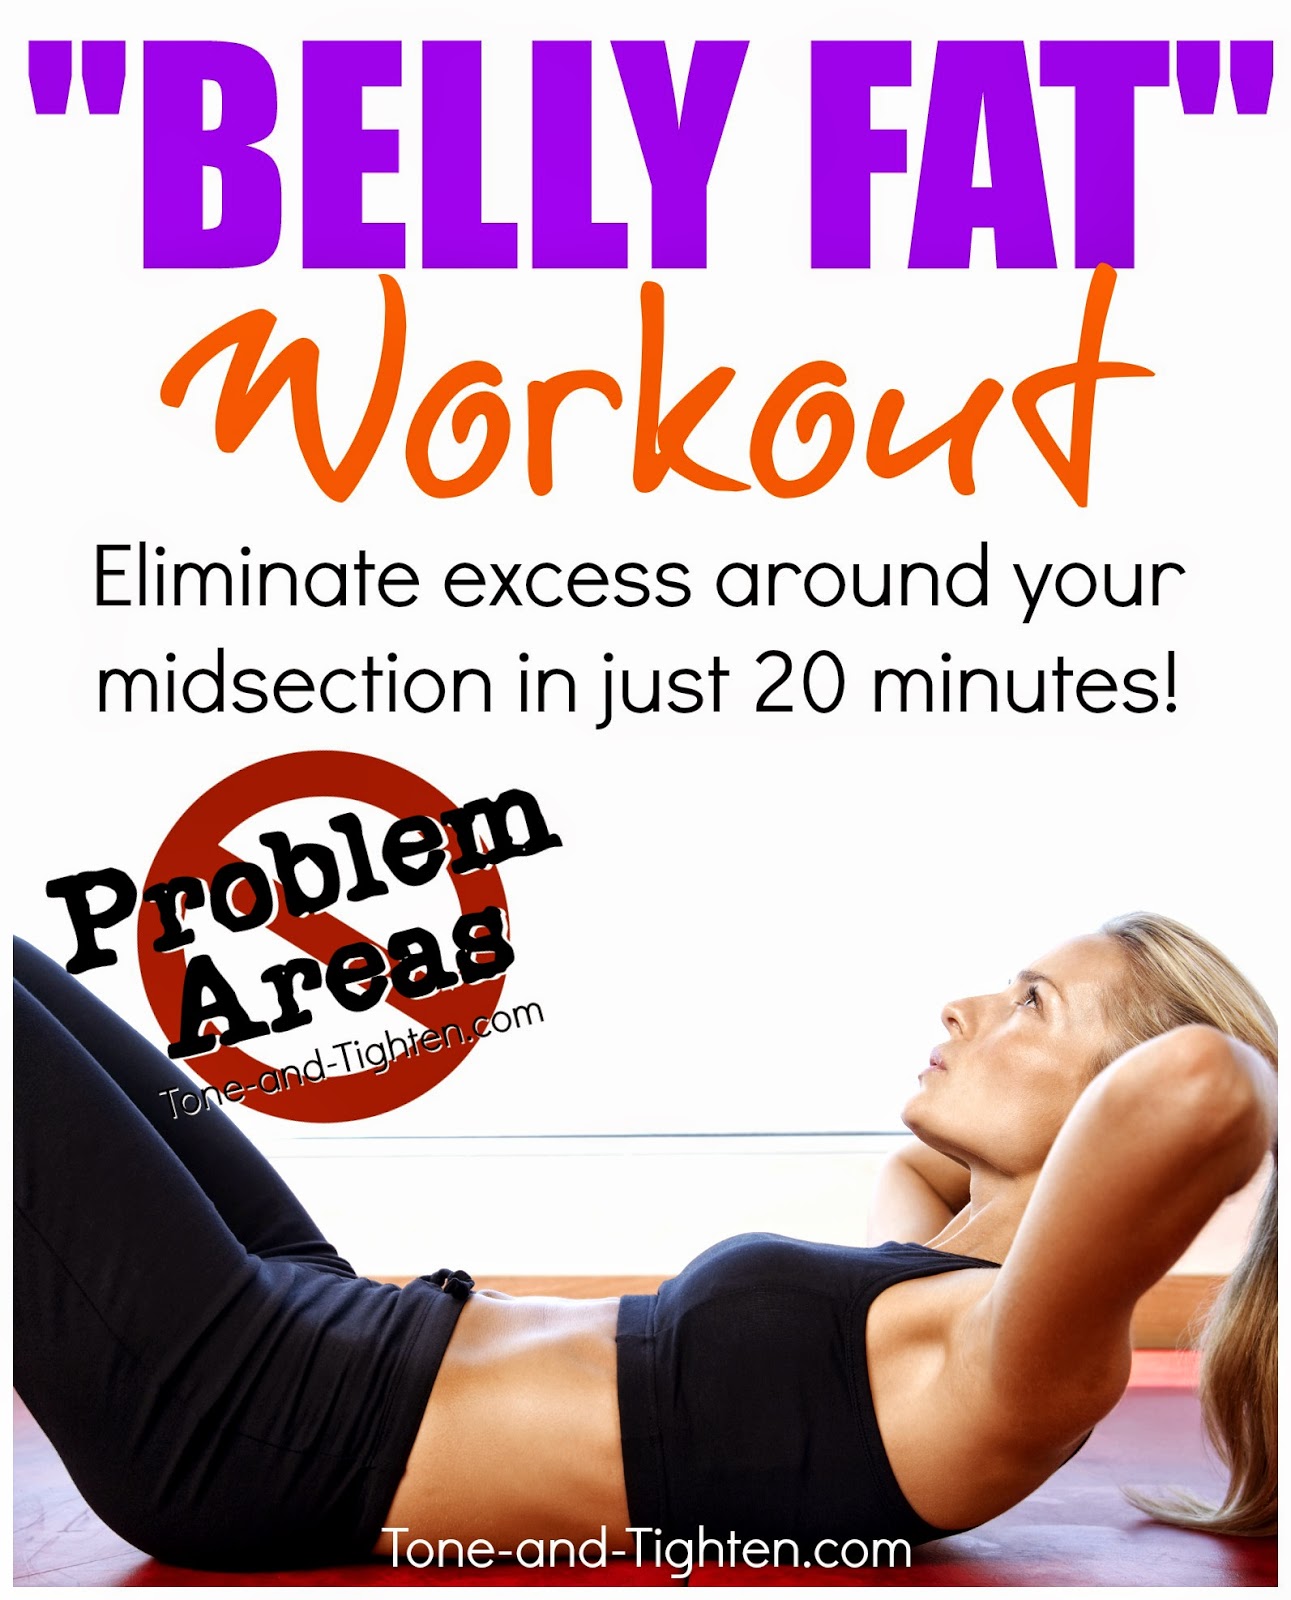 How to get rid of belly fat – “Problem Areas” series on Tone-and-Tighten.com